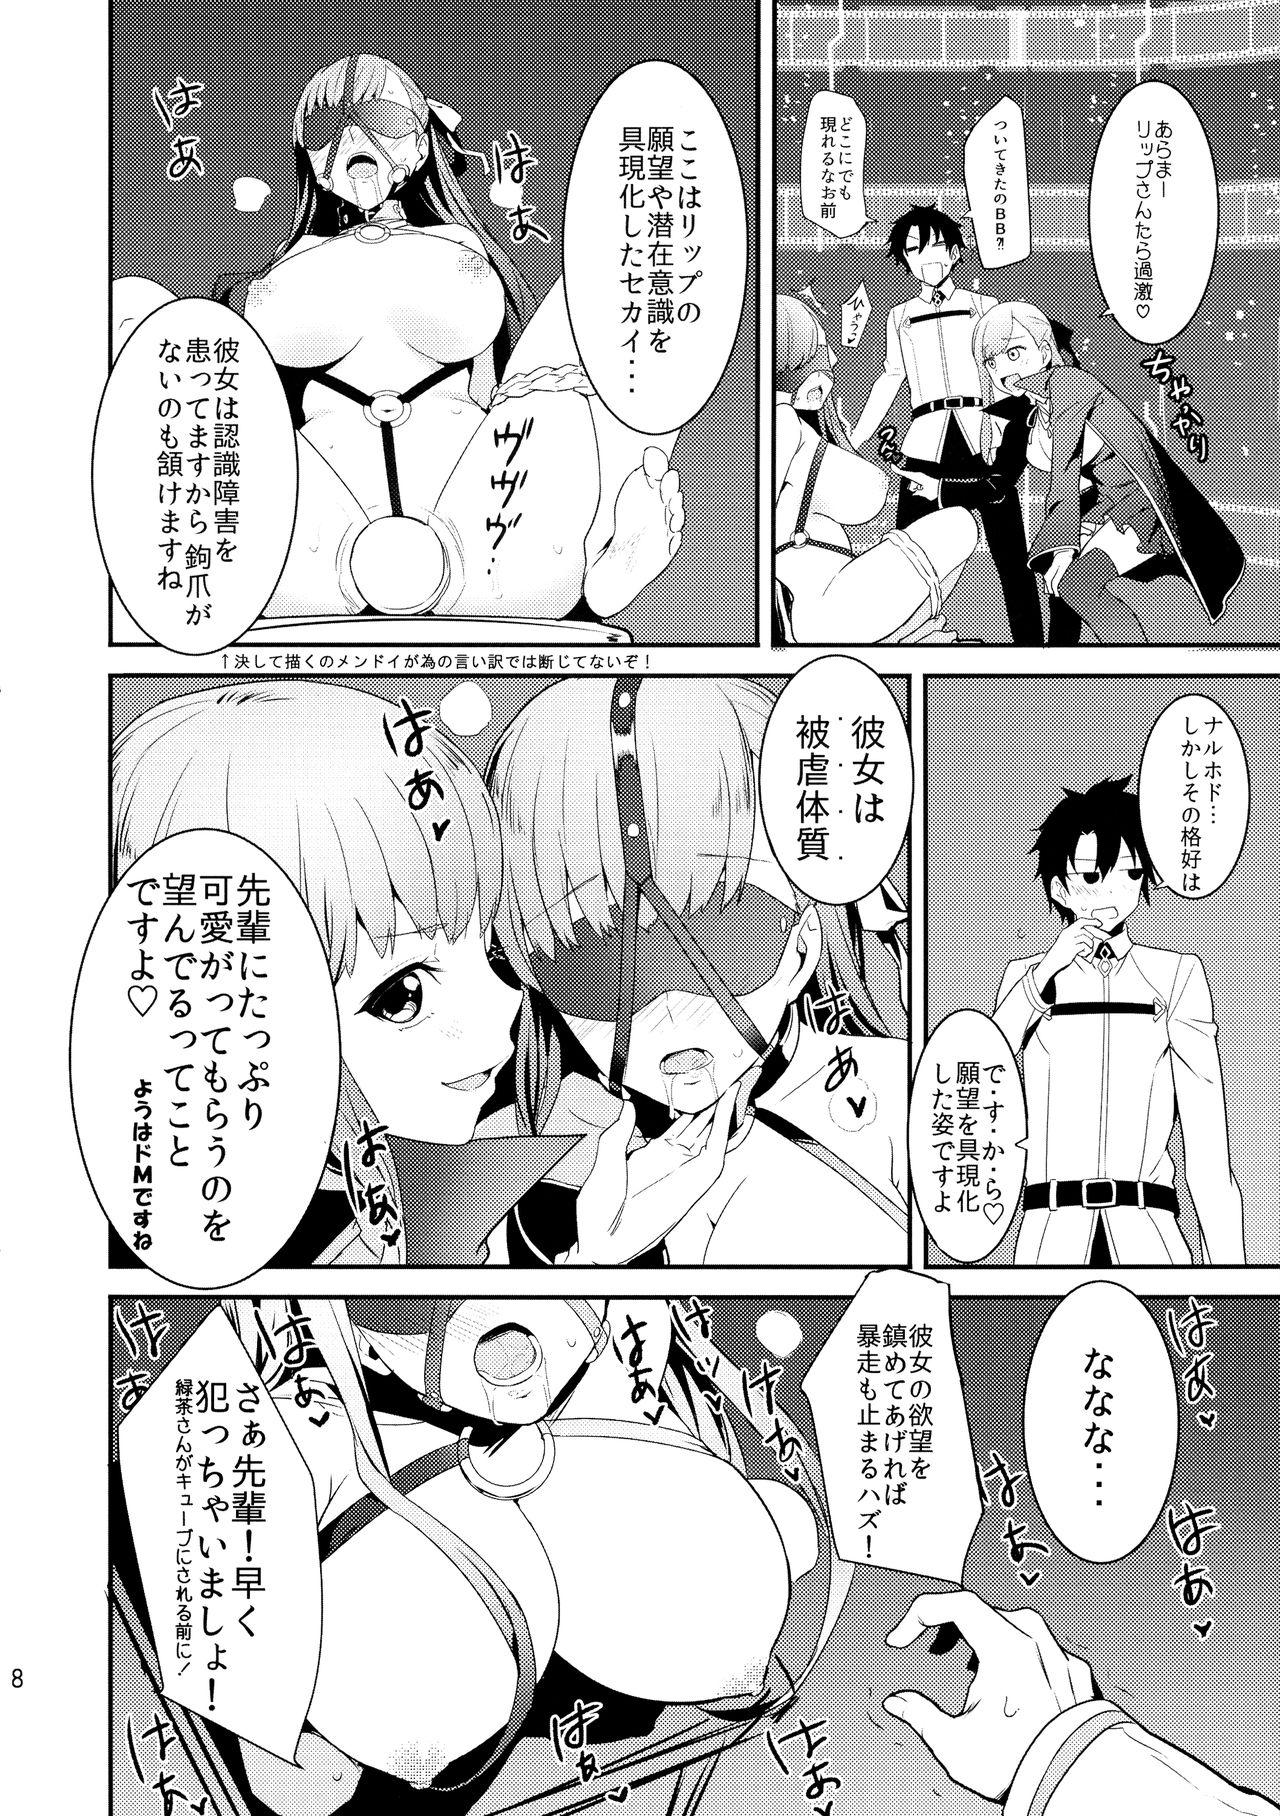 Tanned In the Passion, Melty heart. 1 - Fate grand order Ass Sex - Page 10